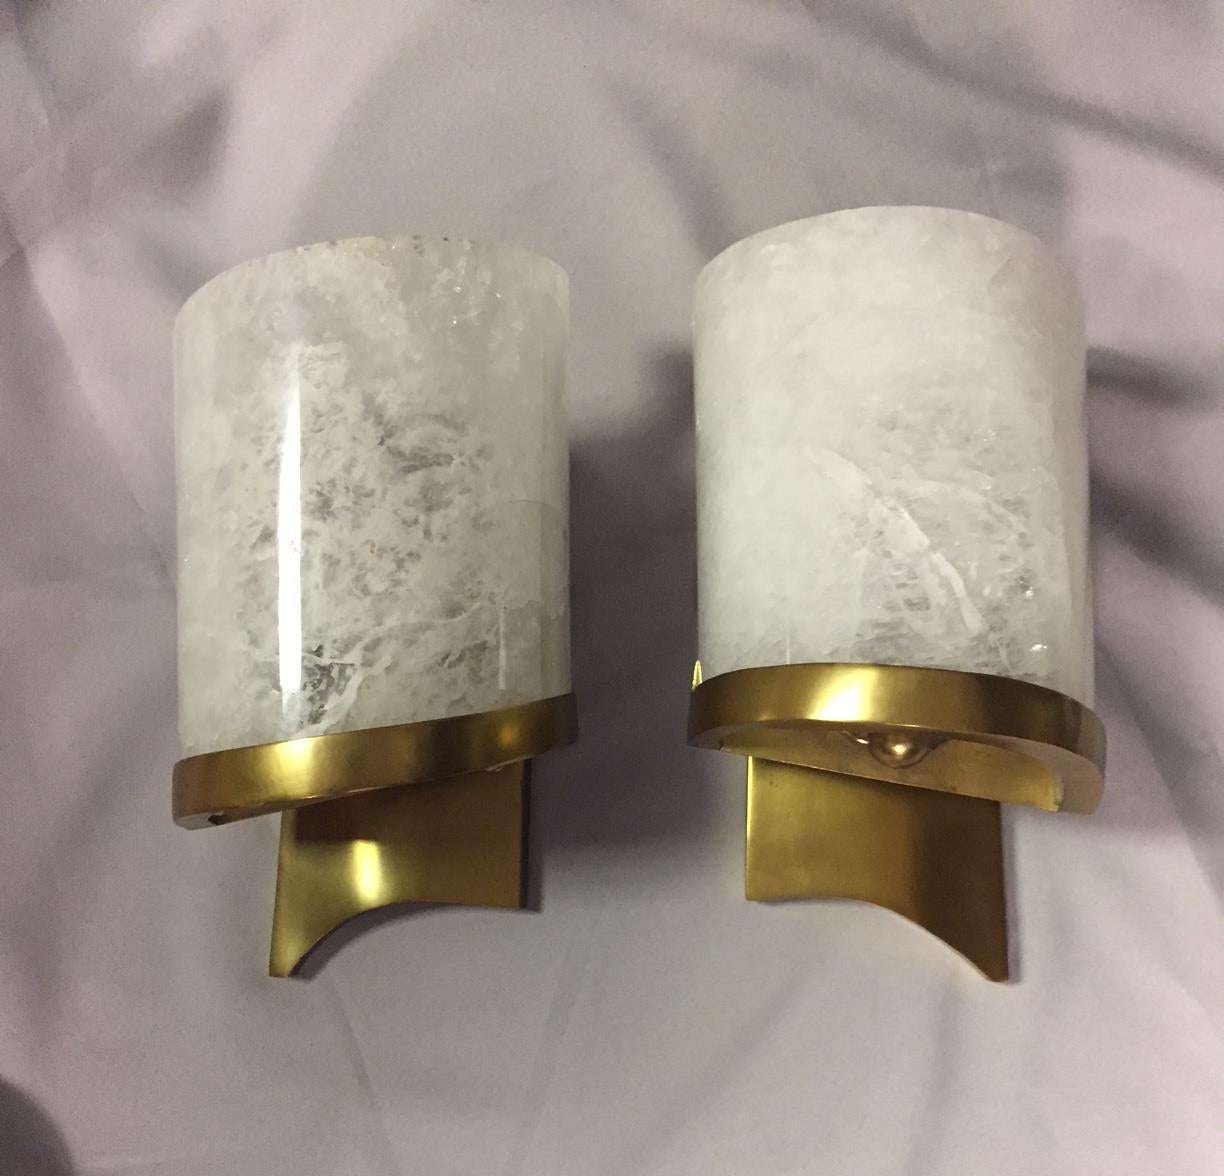 Elegant one-of-a-kind pair of Modern style hand-carved and hand polished rock crystal and brass sconces. 

Rock crystal is a semi-precious stone mined from the earth. These matchless pieces are hand-carved and hand polished from all natural